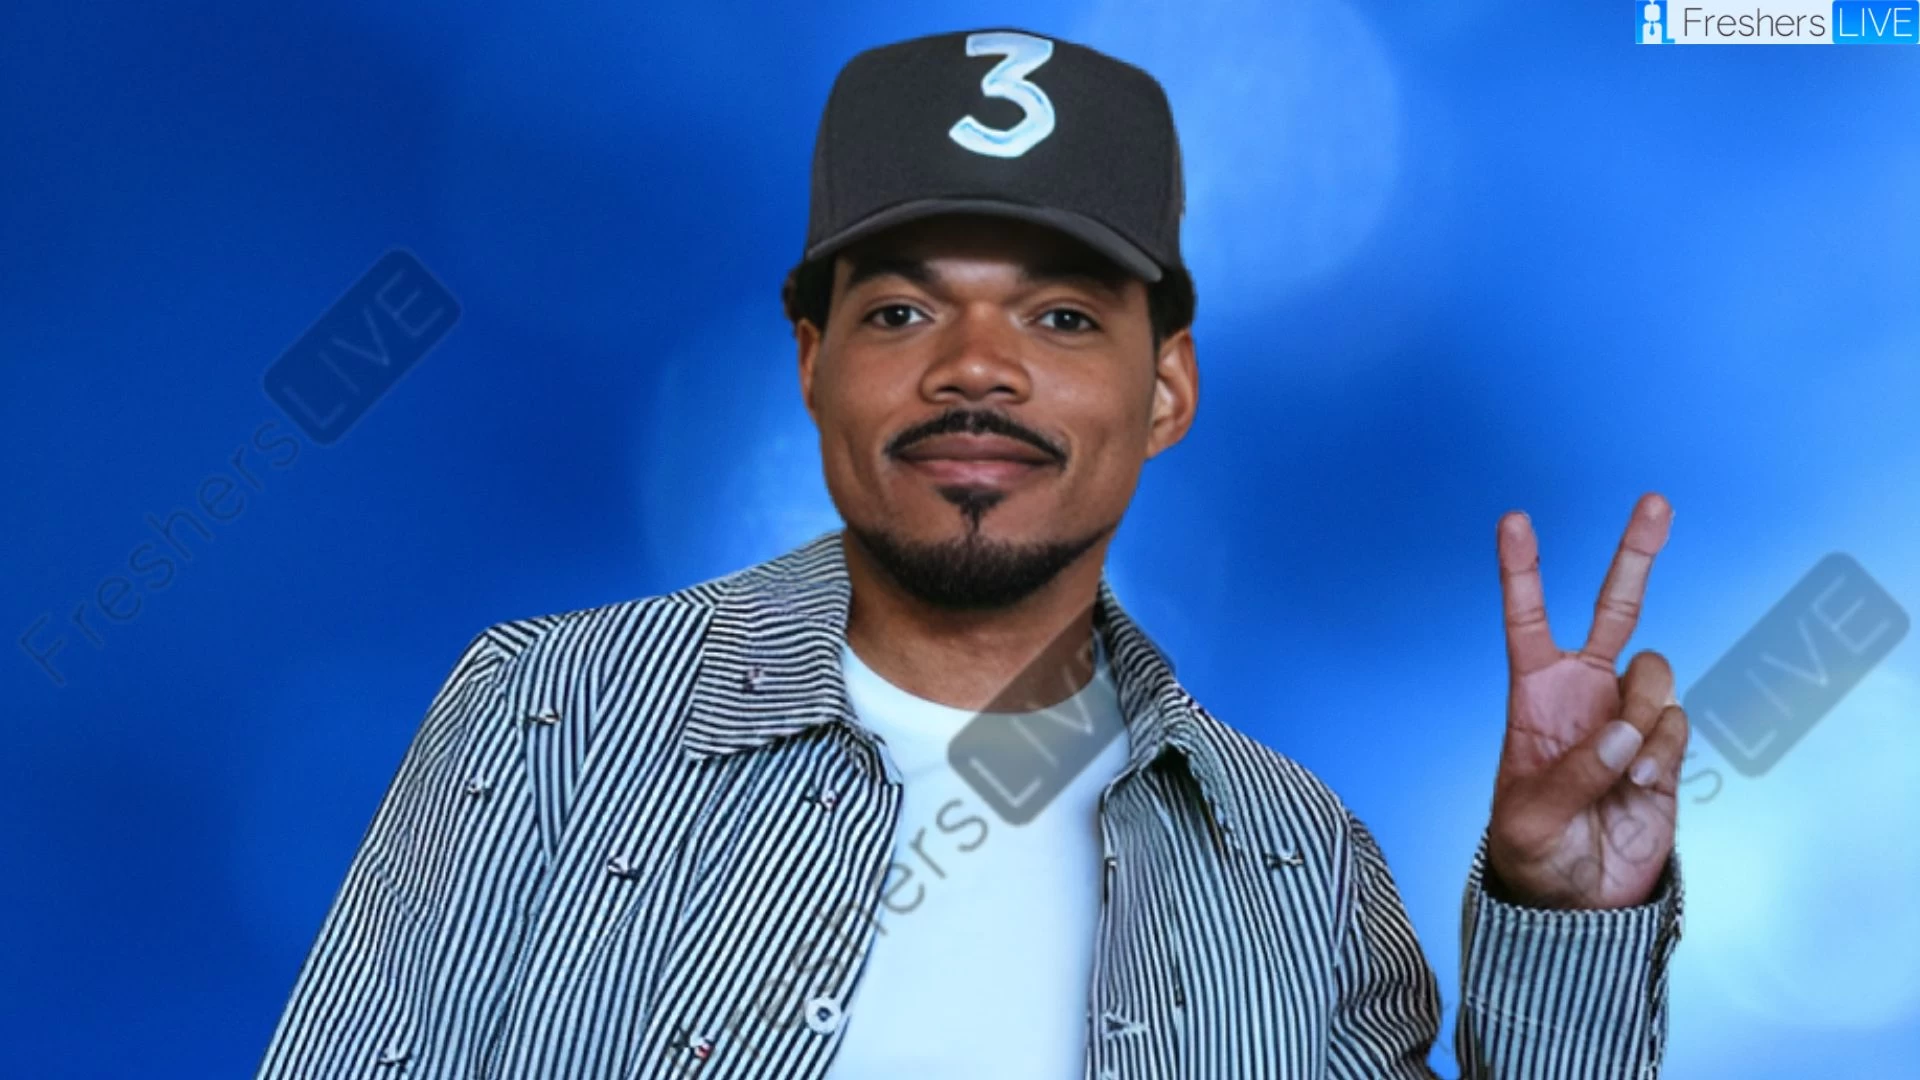 Chance The Rapper Ethnicity, What is Chance The Rapper's Ethnicity?